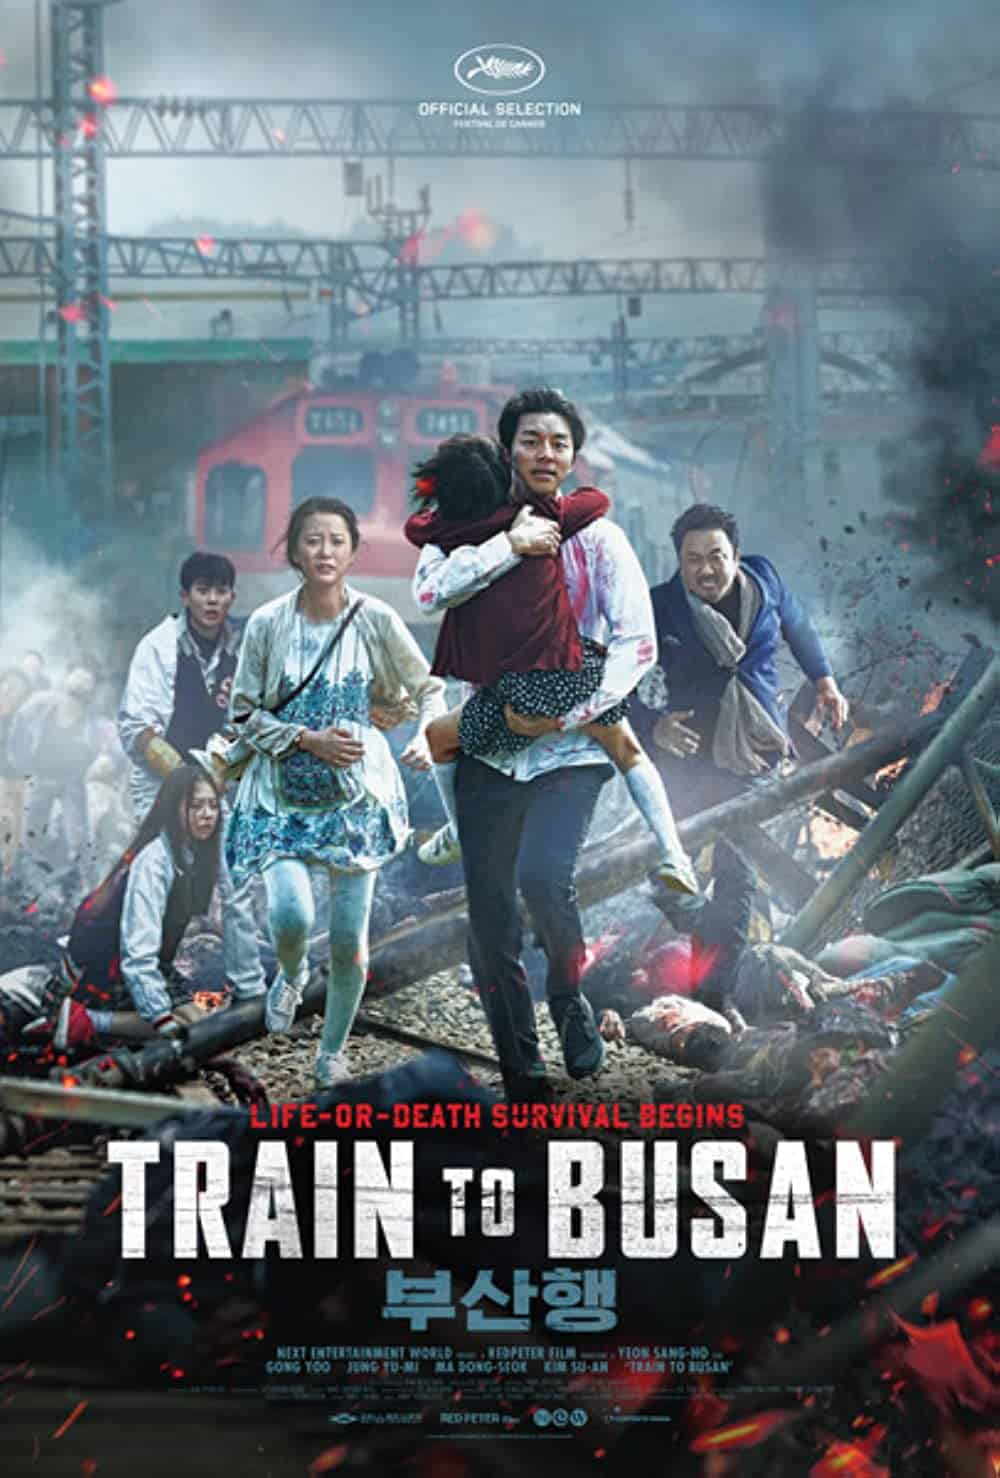 Train to Busan (2016) Best Train Movies You Can't Miss